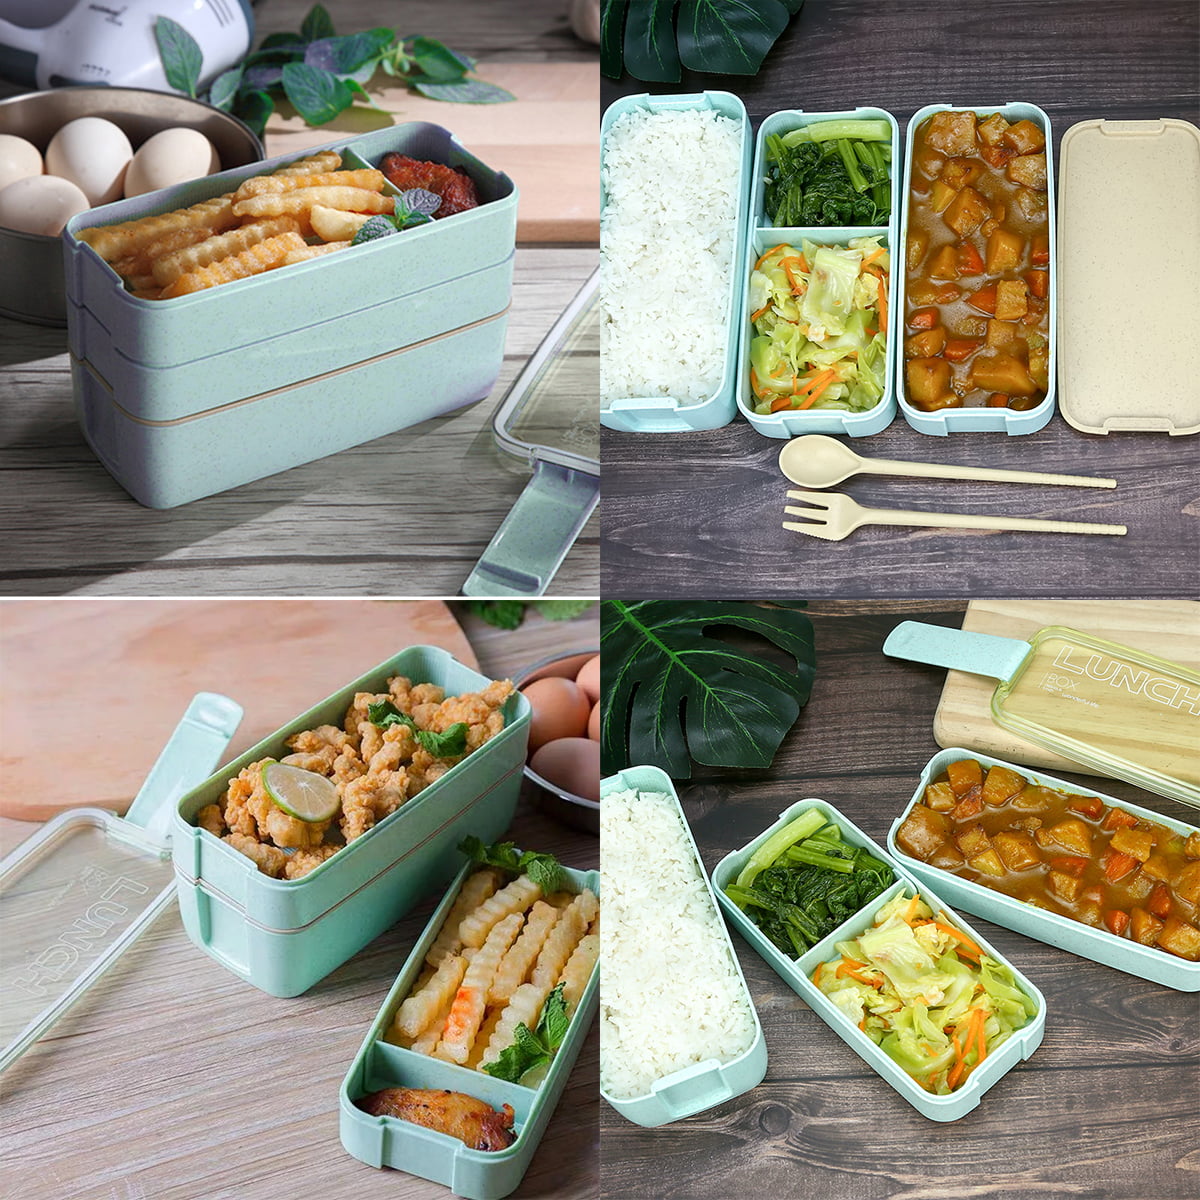 19.99$Bento Lunch Box, Stackable 3 Layers Bento Box Adult Lunch Box, 94OZ  Large Capacity Lunch Containers, Lunch Box Kids with Accessories Kit ,  Leak-Proof, Food-Safe Materials, : r/testingclub